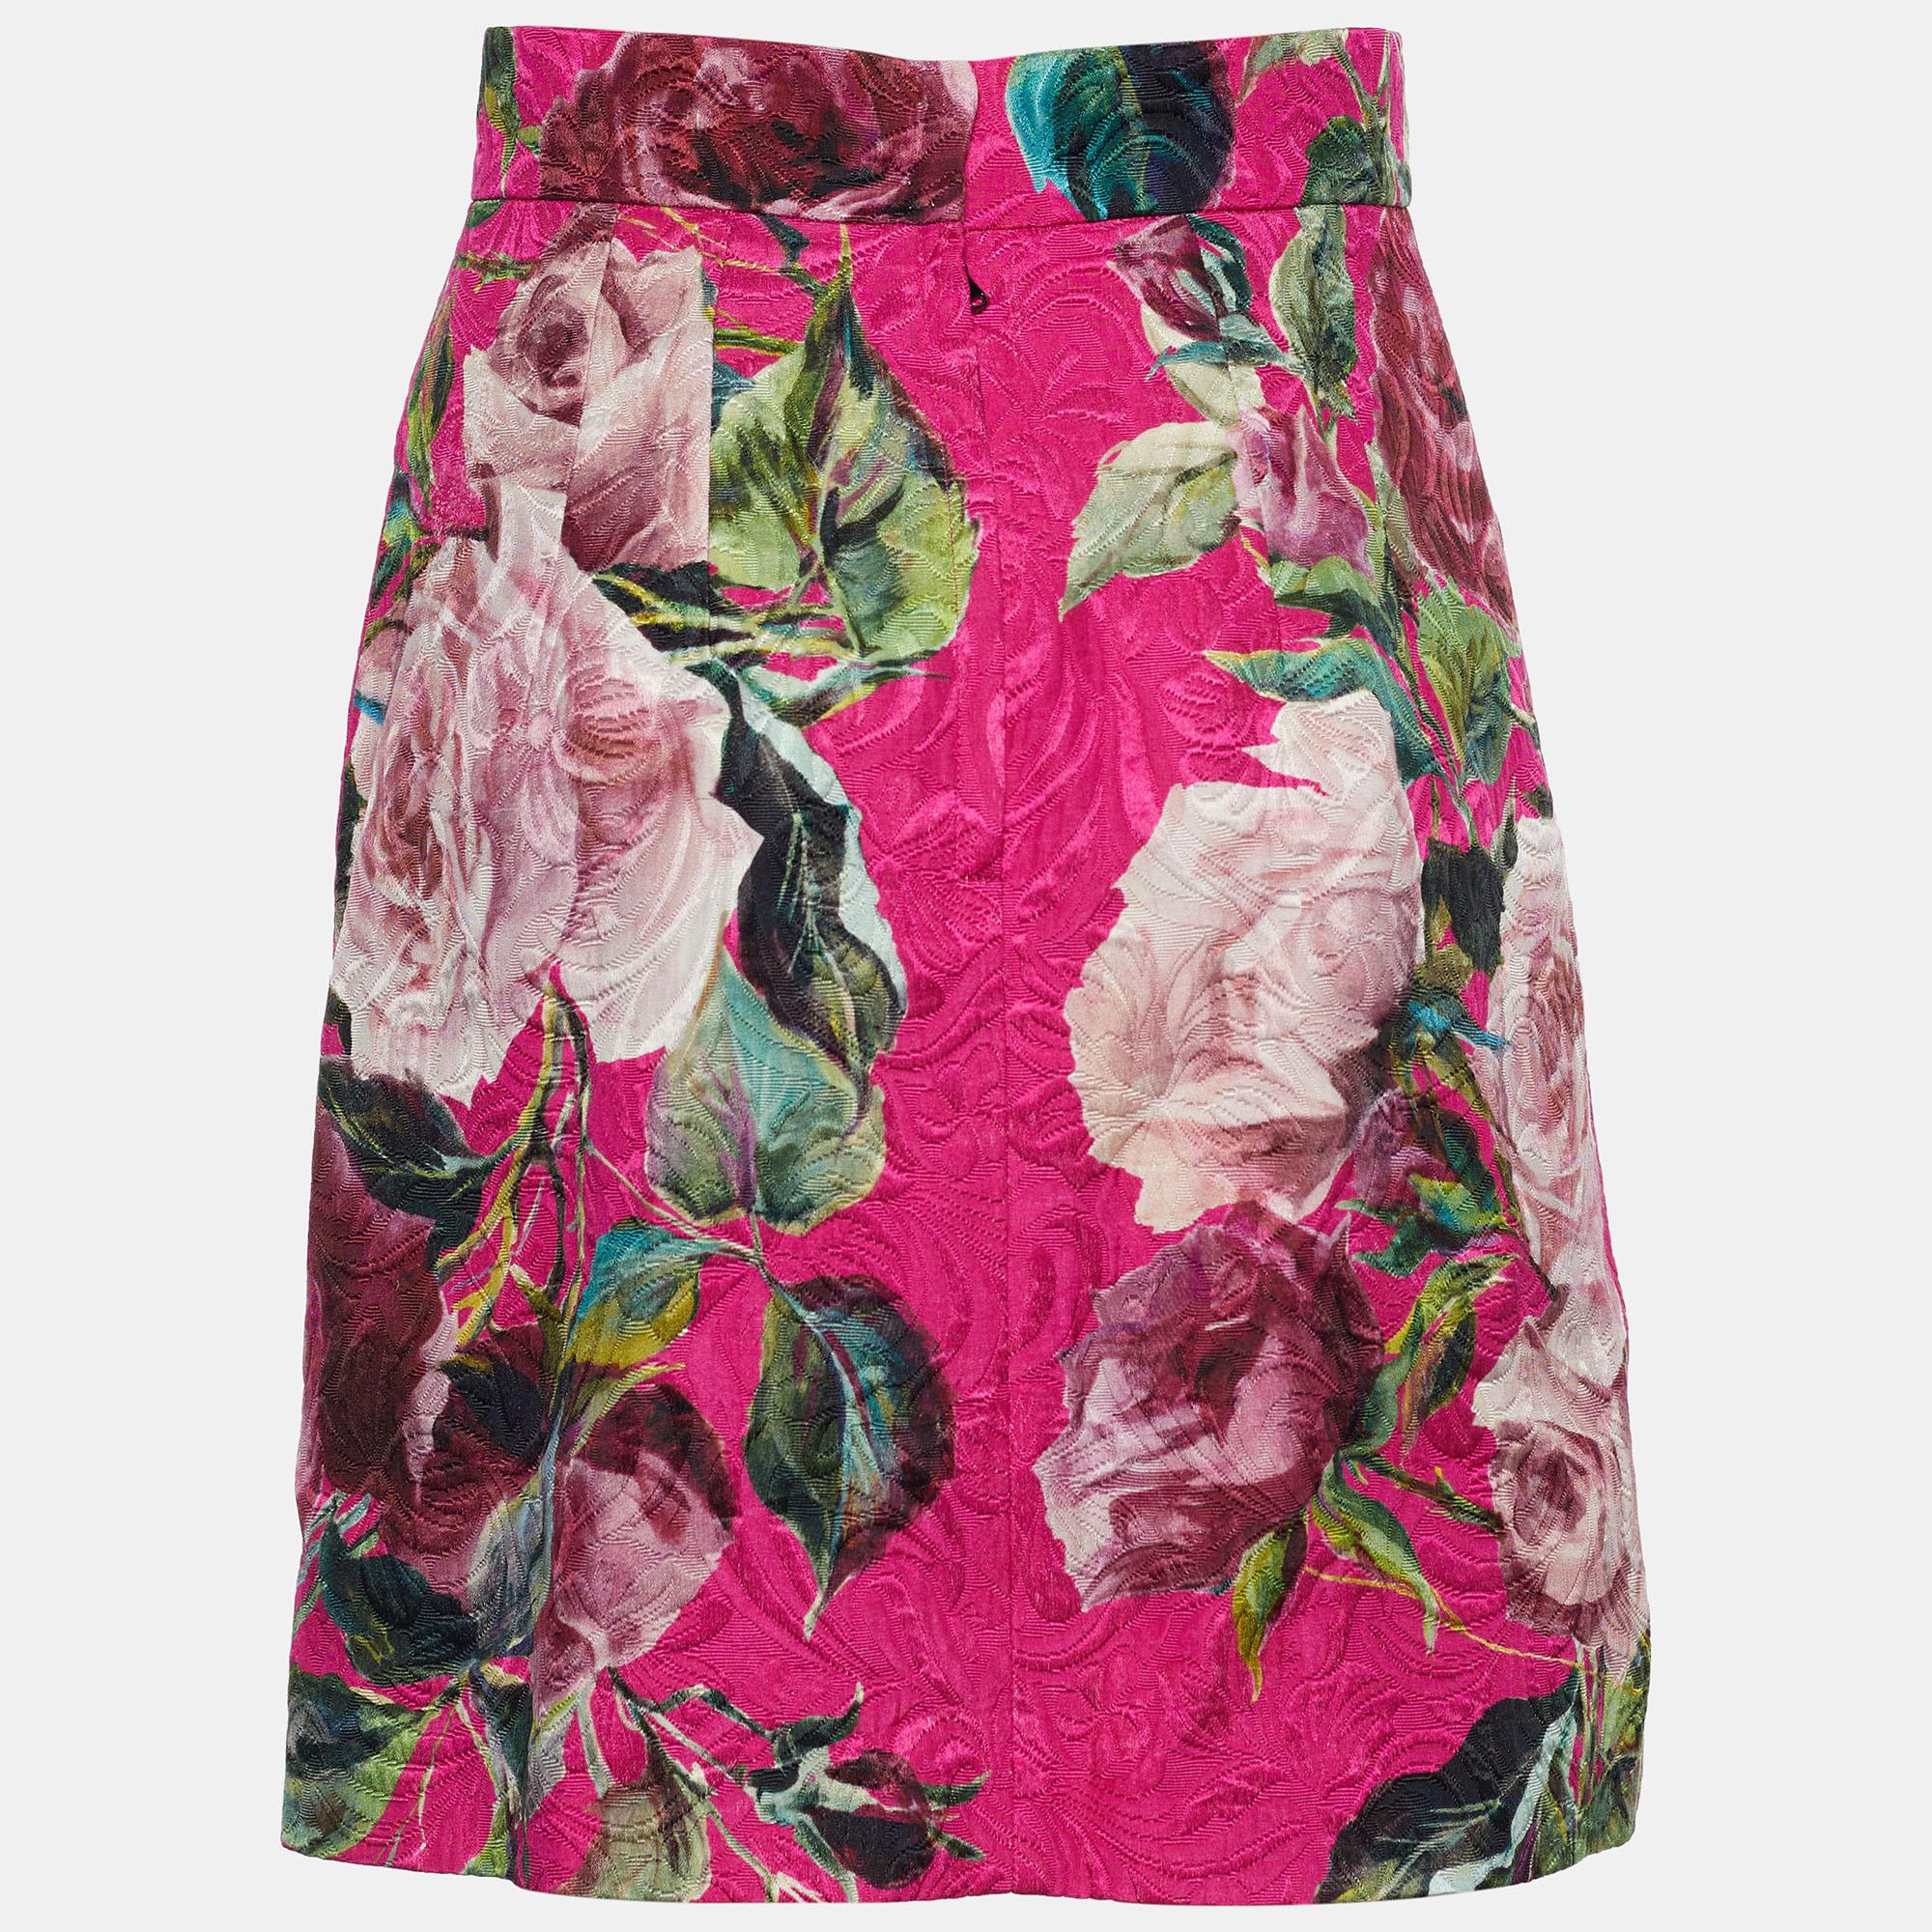 Designed using a plush cotton and silk jacquard fabric, this mini skirt from Dolce & Gabbana is a good option for casual parties. It is pink and flaunts an uber-feminine and pretty rose print all over. The skirt will look amazing when teamed with a